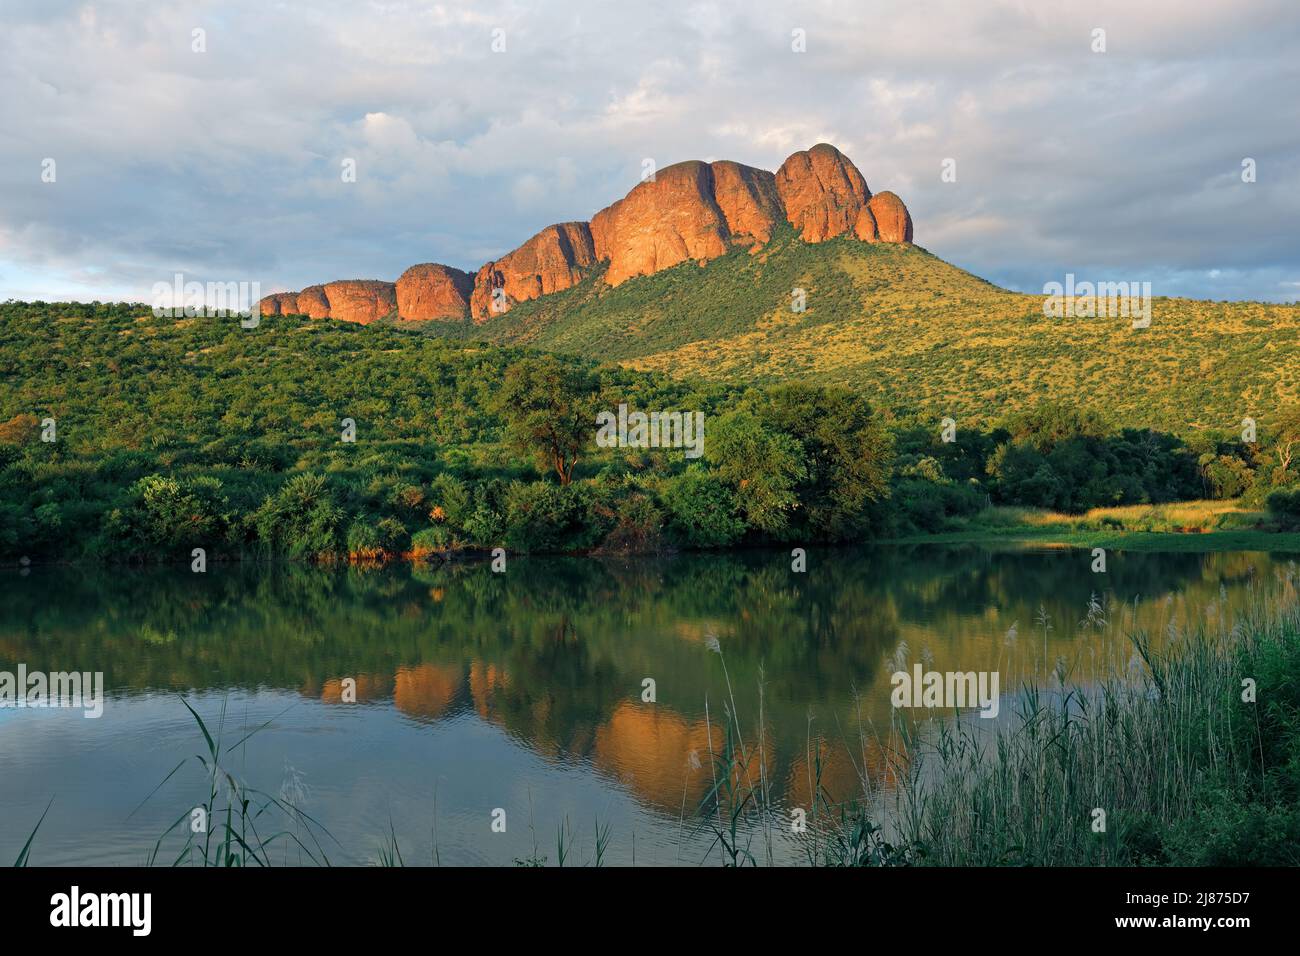 Scenic mountain landscape with water reflection, Marakele National Park, South Africa Stock Photo